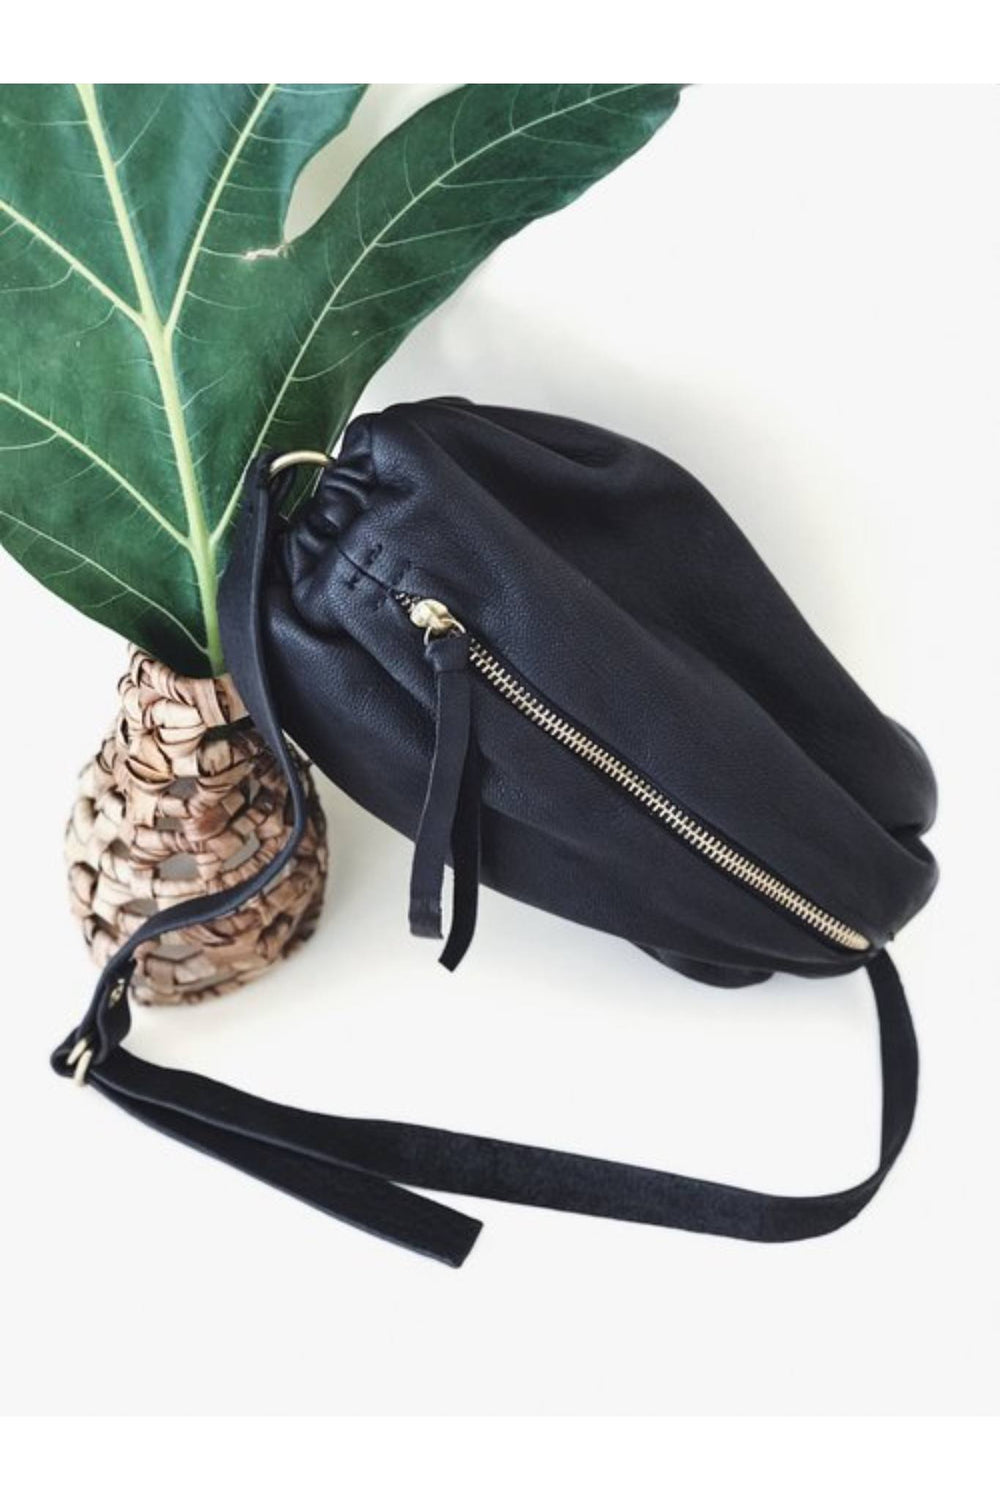 Scrunchie Bag by 2nd Story Goods